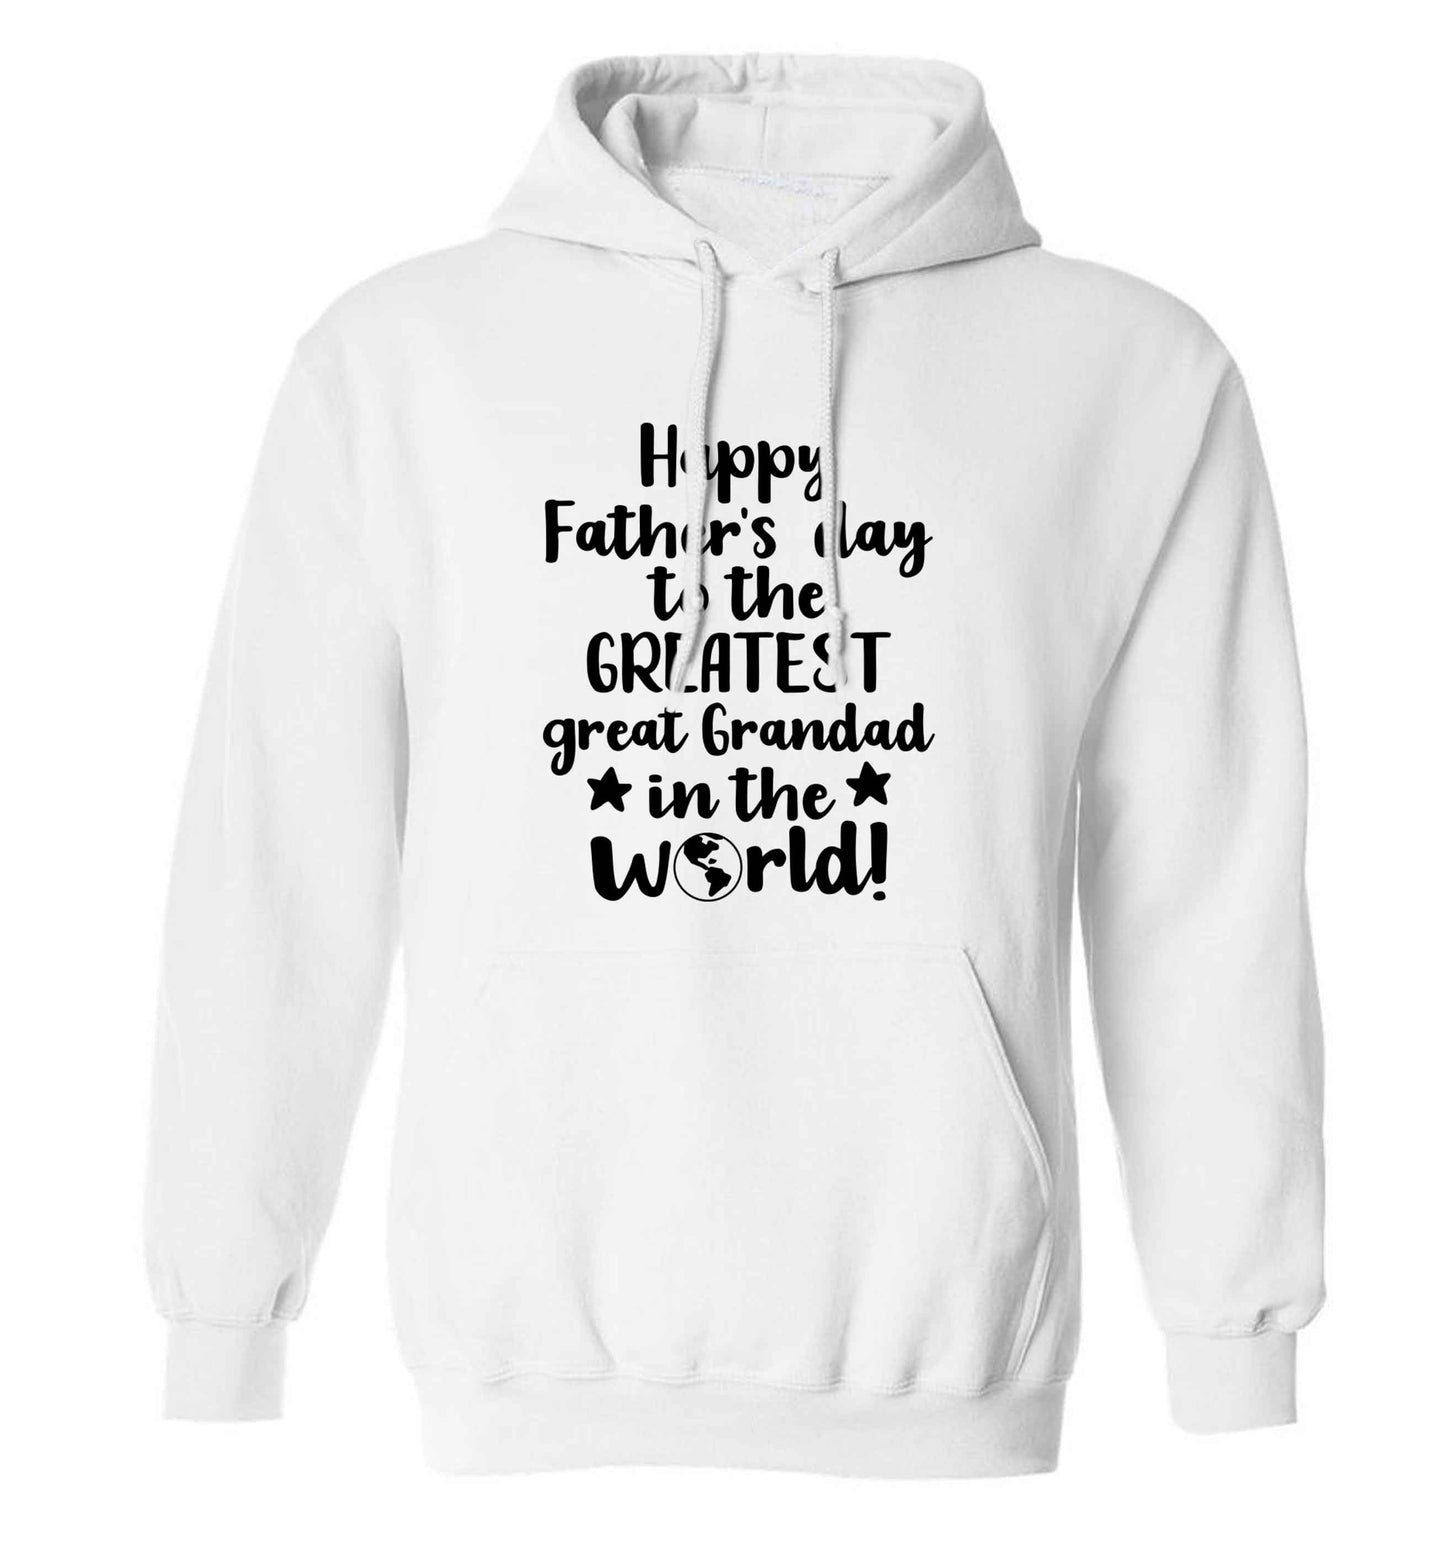 Happy Father's day to the greatest great grandad in the world adults unisex white hoodie 2XL